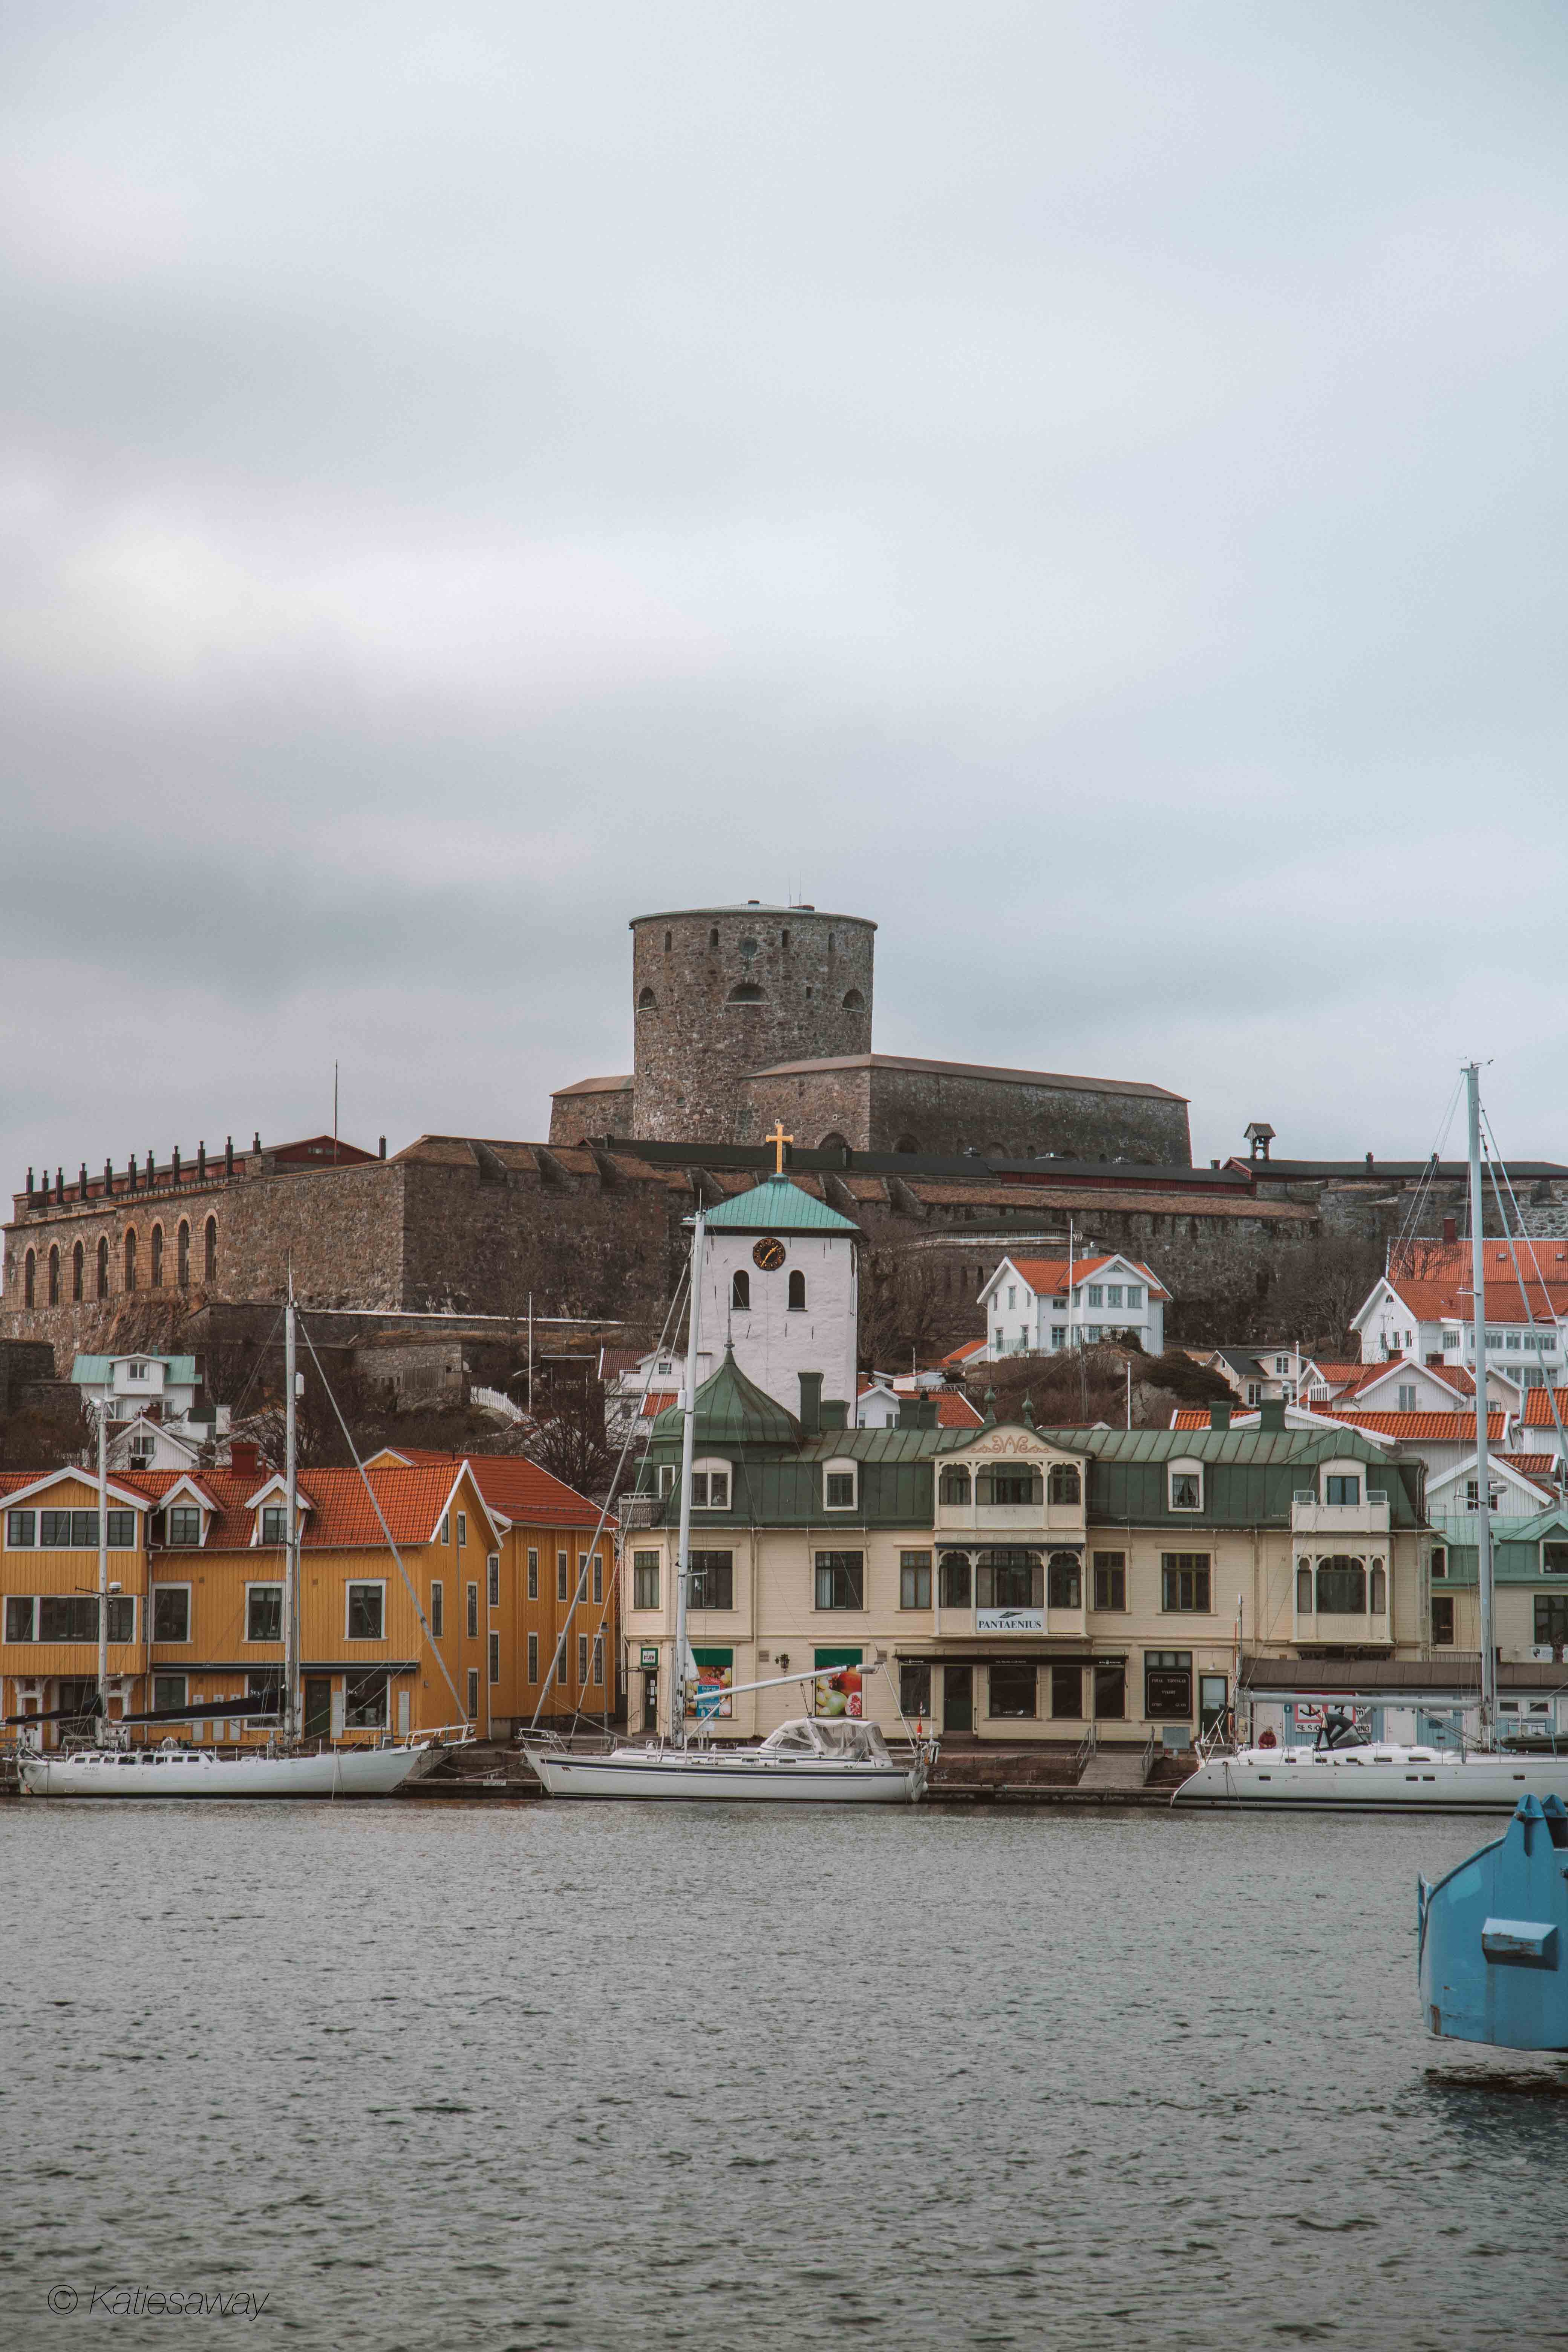 View of Marstrand from the ferry